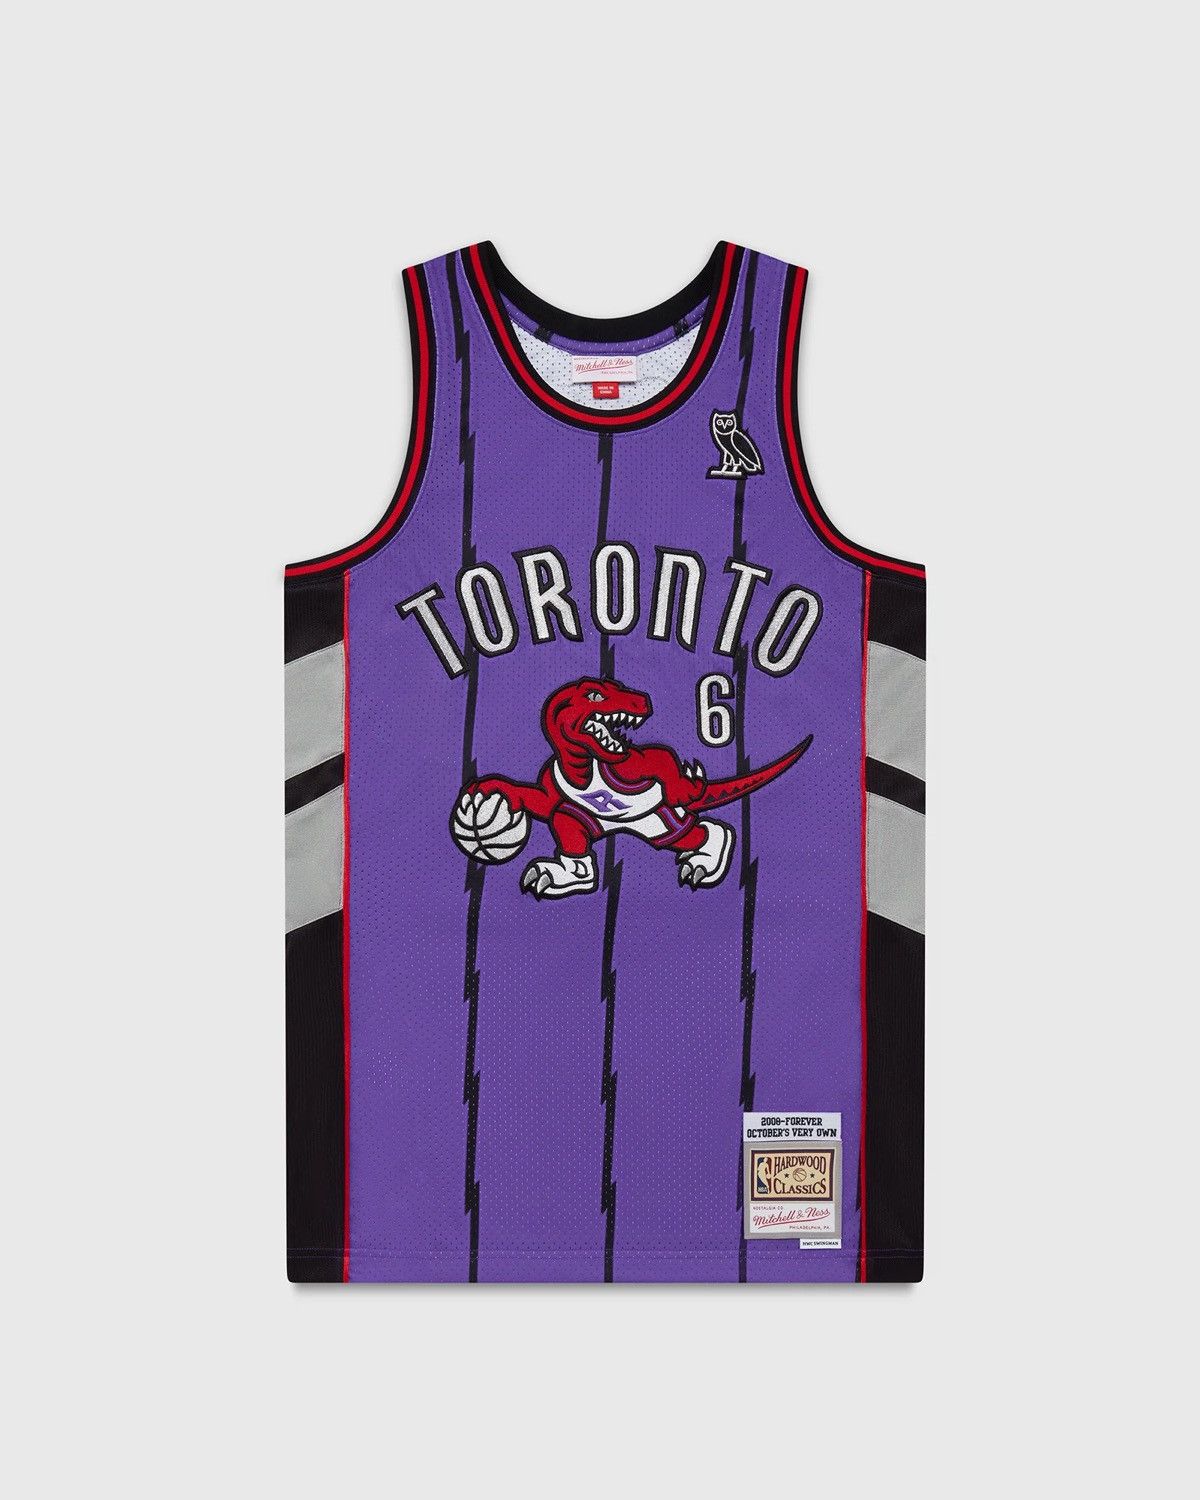 Octobers Very Own OVO Toronto Raptors x Mitchell & Ness Basketball Jersey Size US XL / EU 56 / 4 - 2 Preview